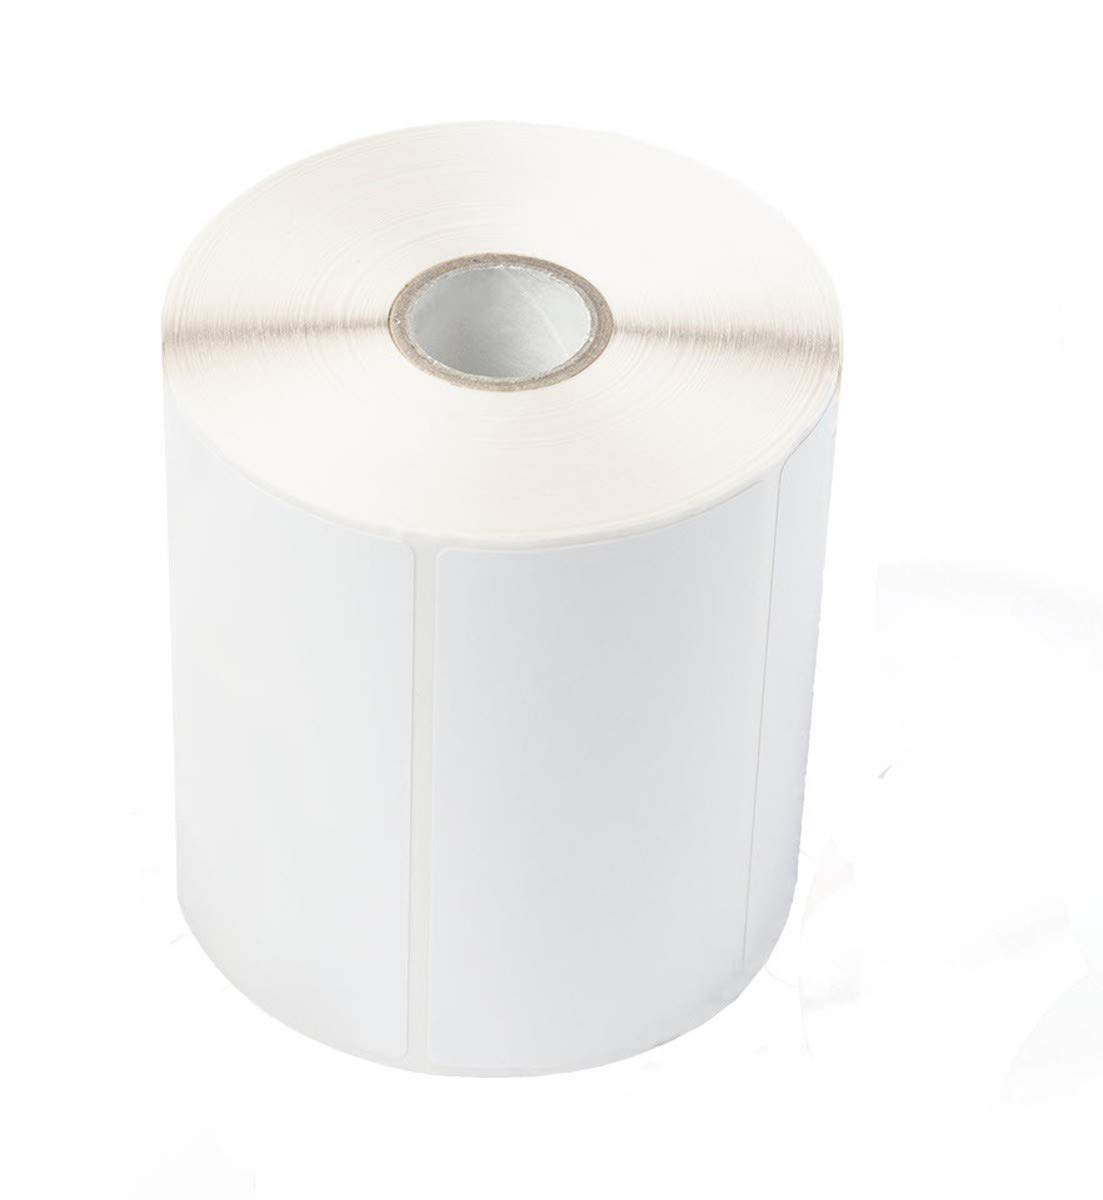 UNCOATED THERMAL TRANSFER LABEL